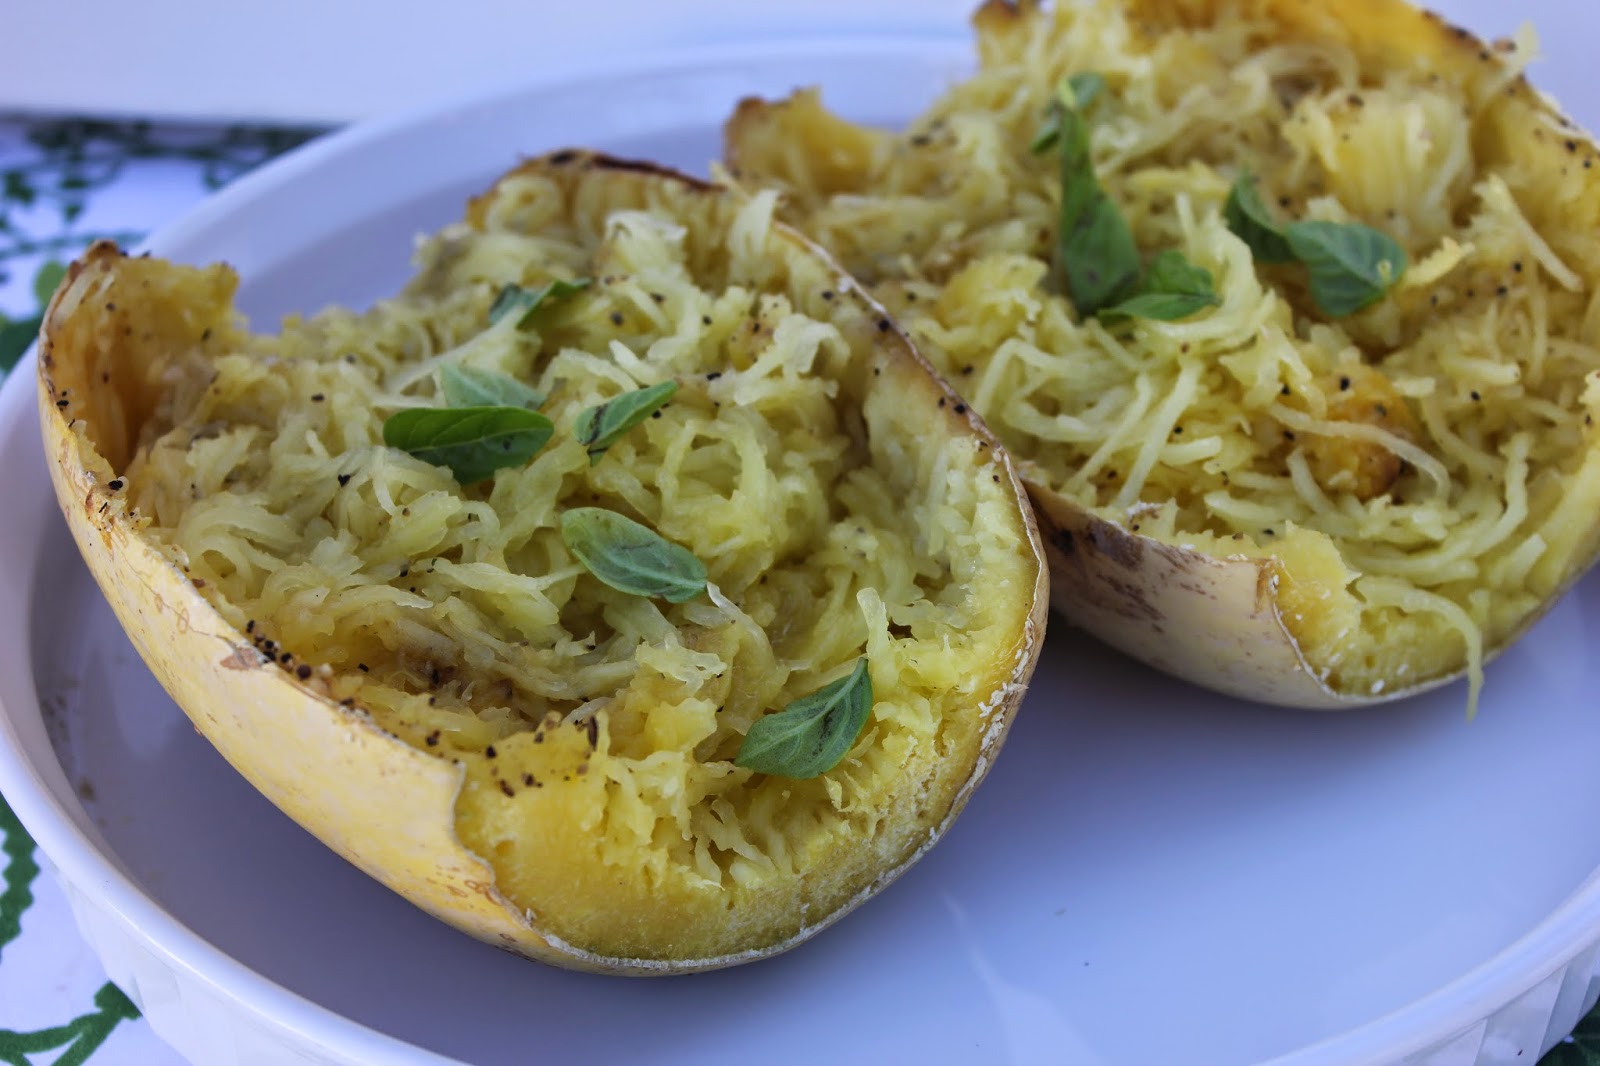 Recipe: Vegetable, Recipe: Side Dishes, Garden Recipes, Recipe: Healthy, Spaghetti Squash Bowls, Perfect way to cook Spaghetti Squash, Deals to Meals